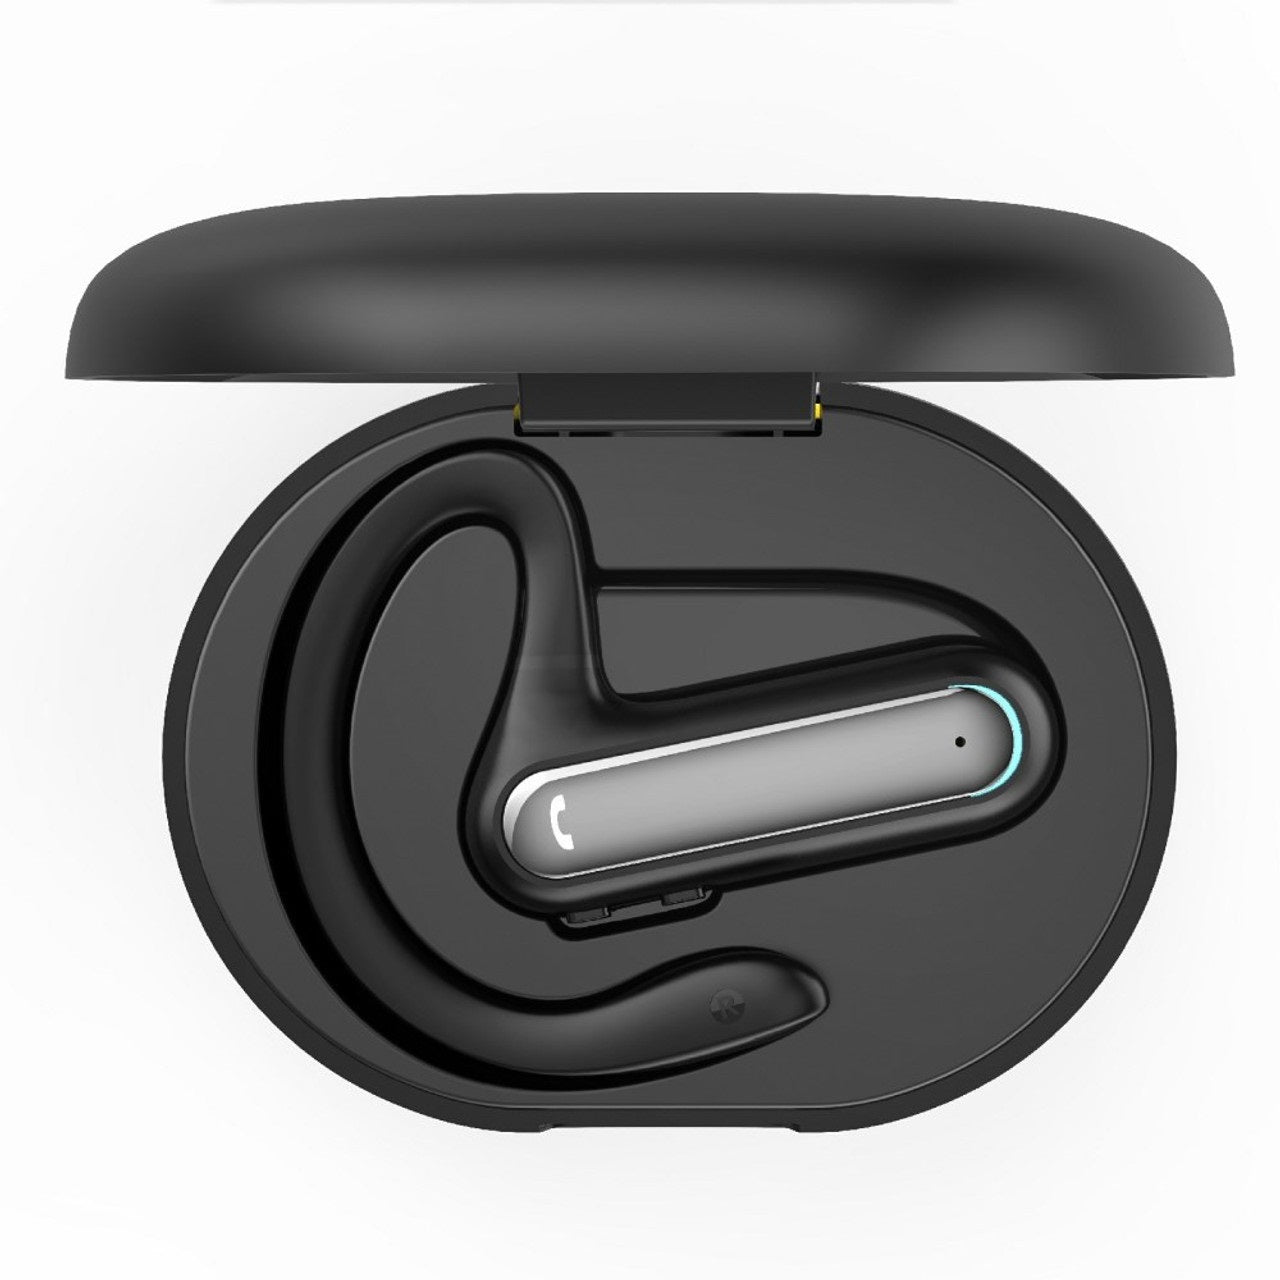 Wireless Bluetooth Headset with Charging Case - F810C - 887554